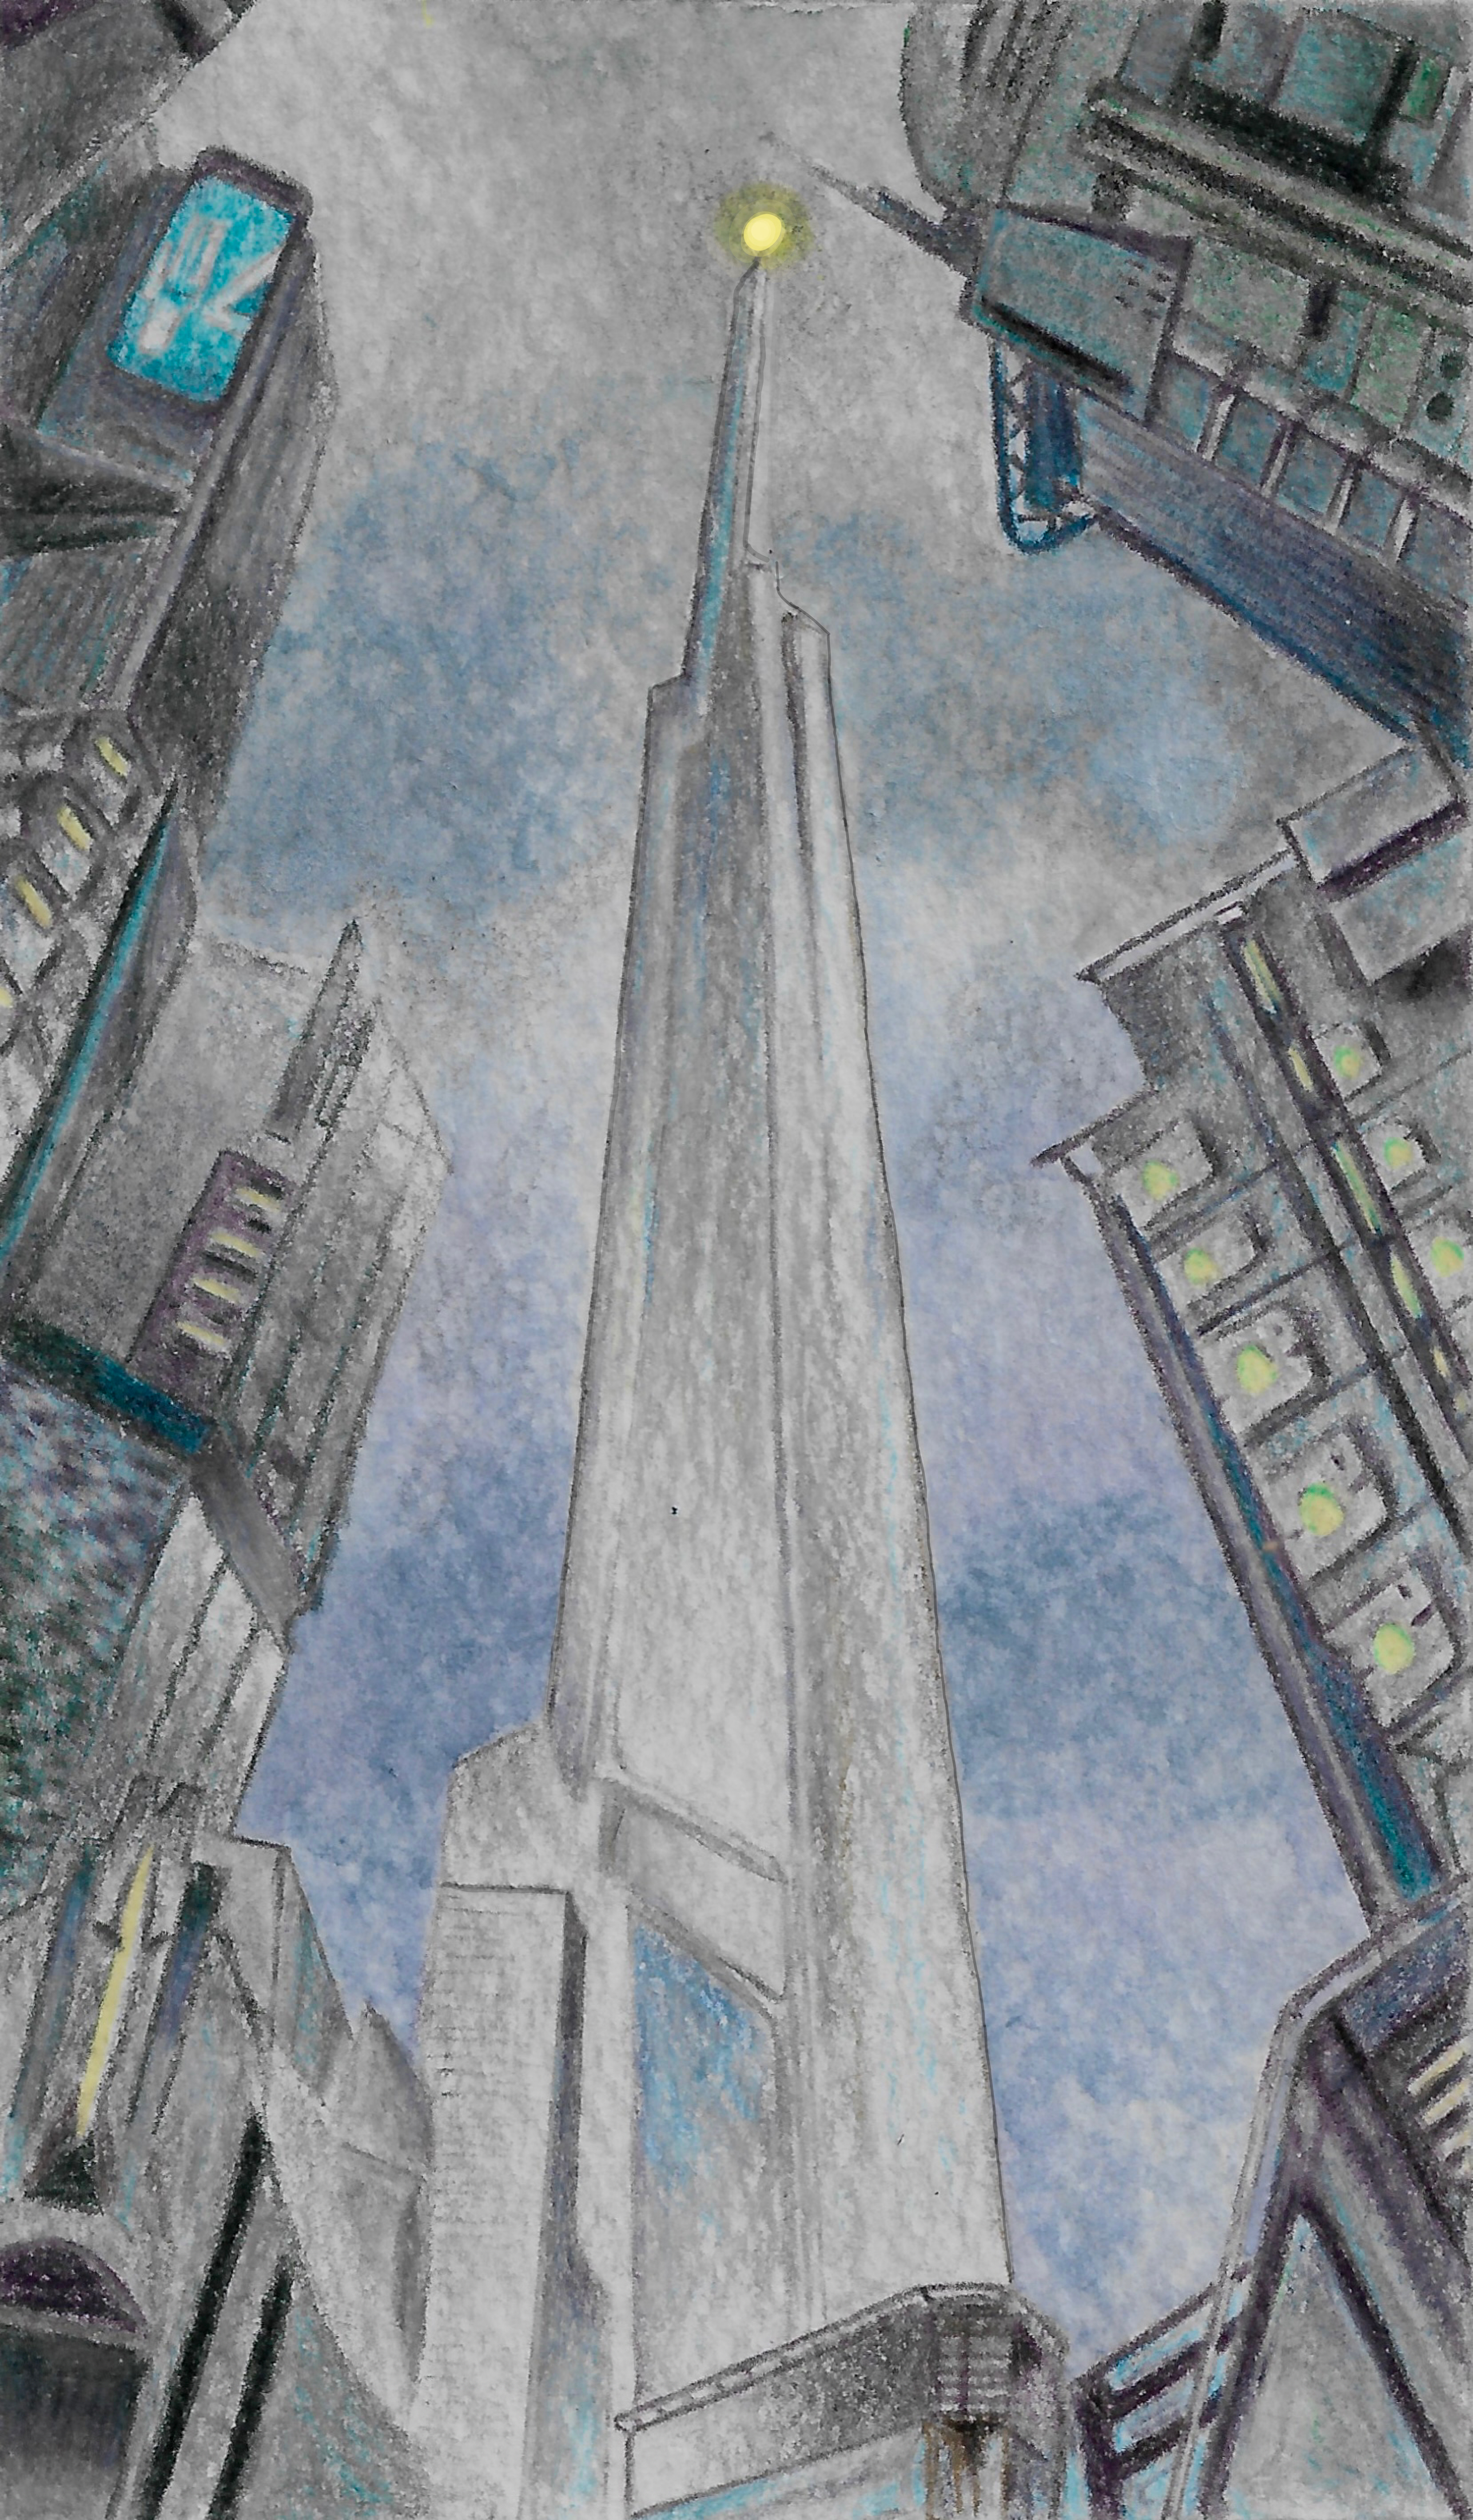 waterpaint/colour pencil illustration of tall glass towers